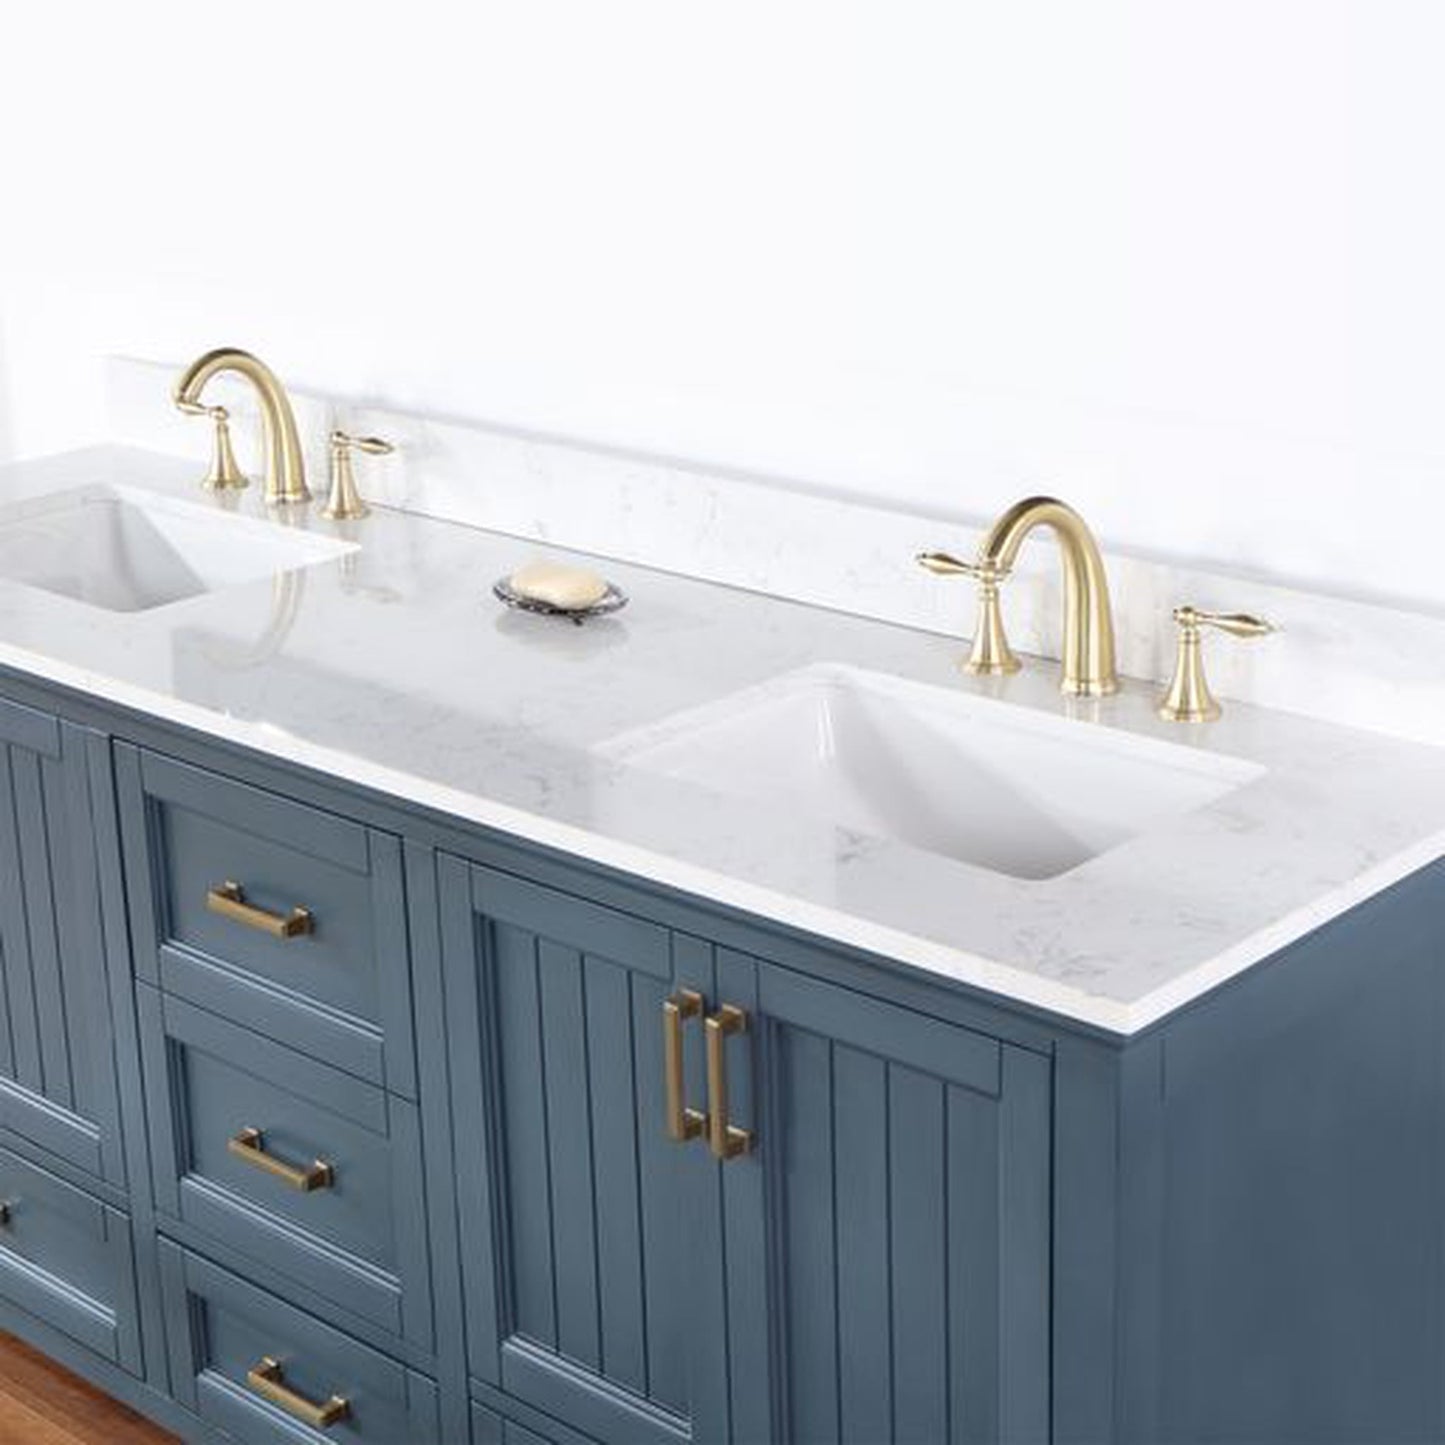 Altair Isla 72" Double Classic Blue Freestanding Bathroom Vanity Set With Aosta White Composite Stone Top, Two Rectangular Undermount Ceramic Sinks, and Overflow